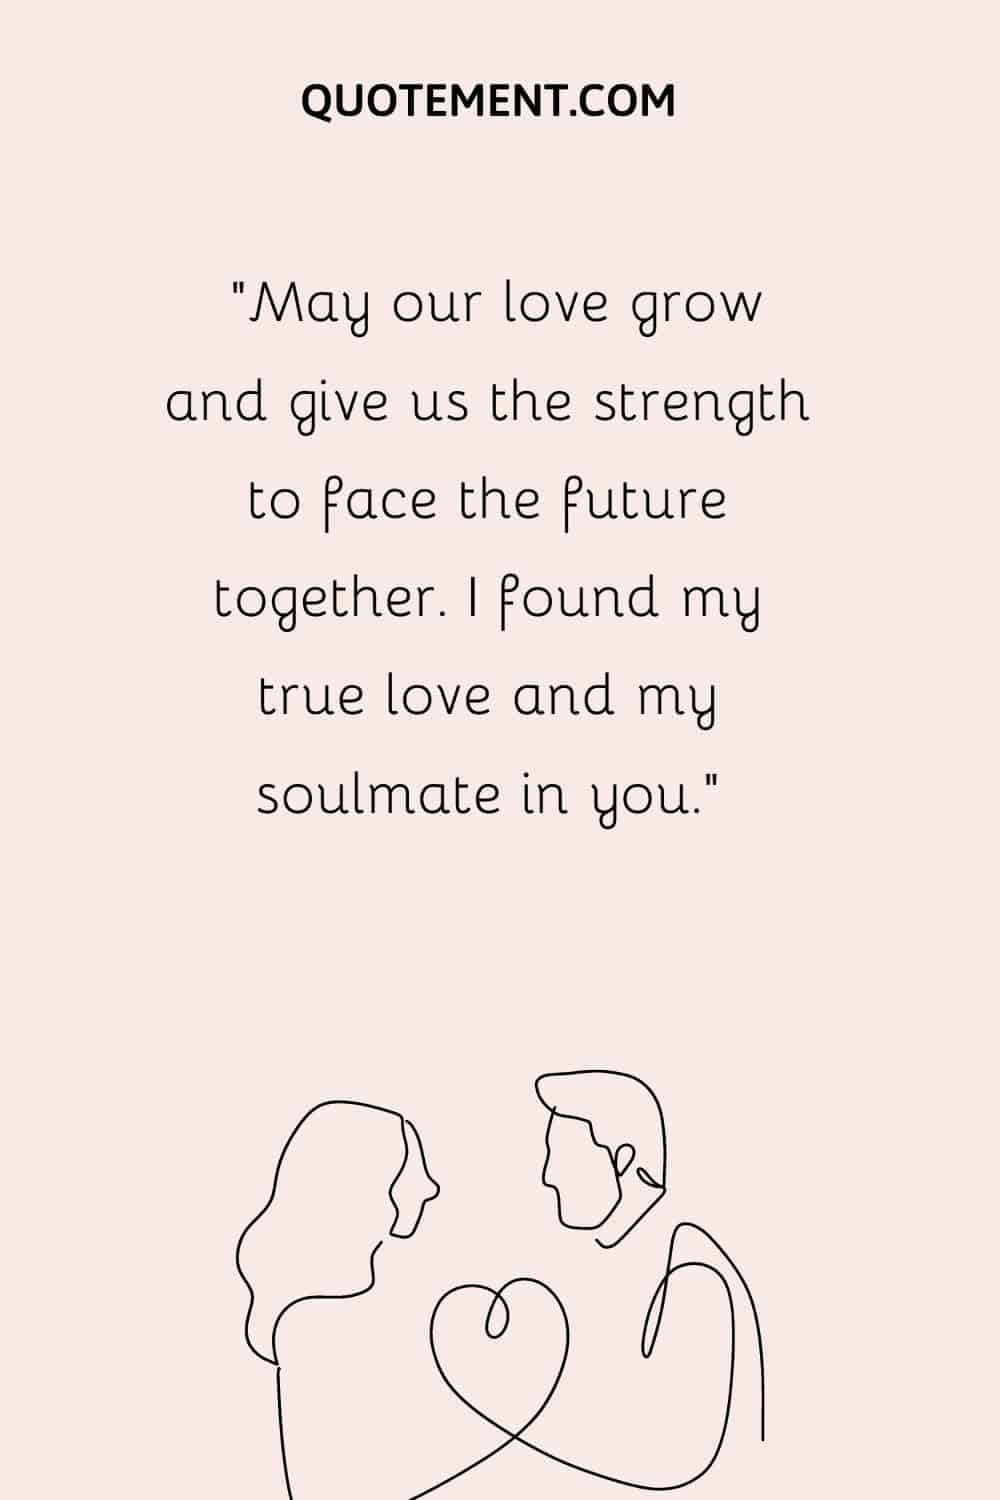 “May our love grow and give us the strength to face the future together. I found my true love and my soulmate in you.”